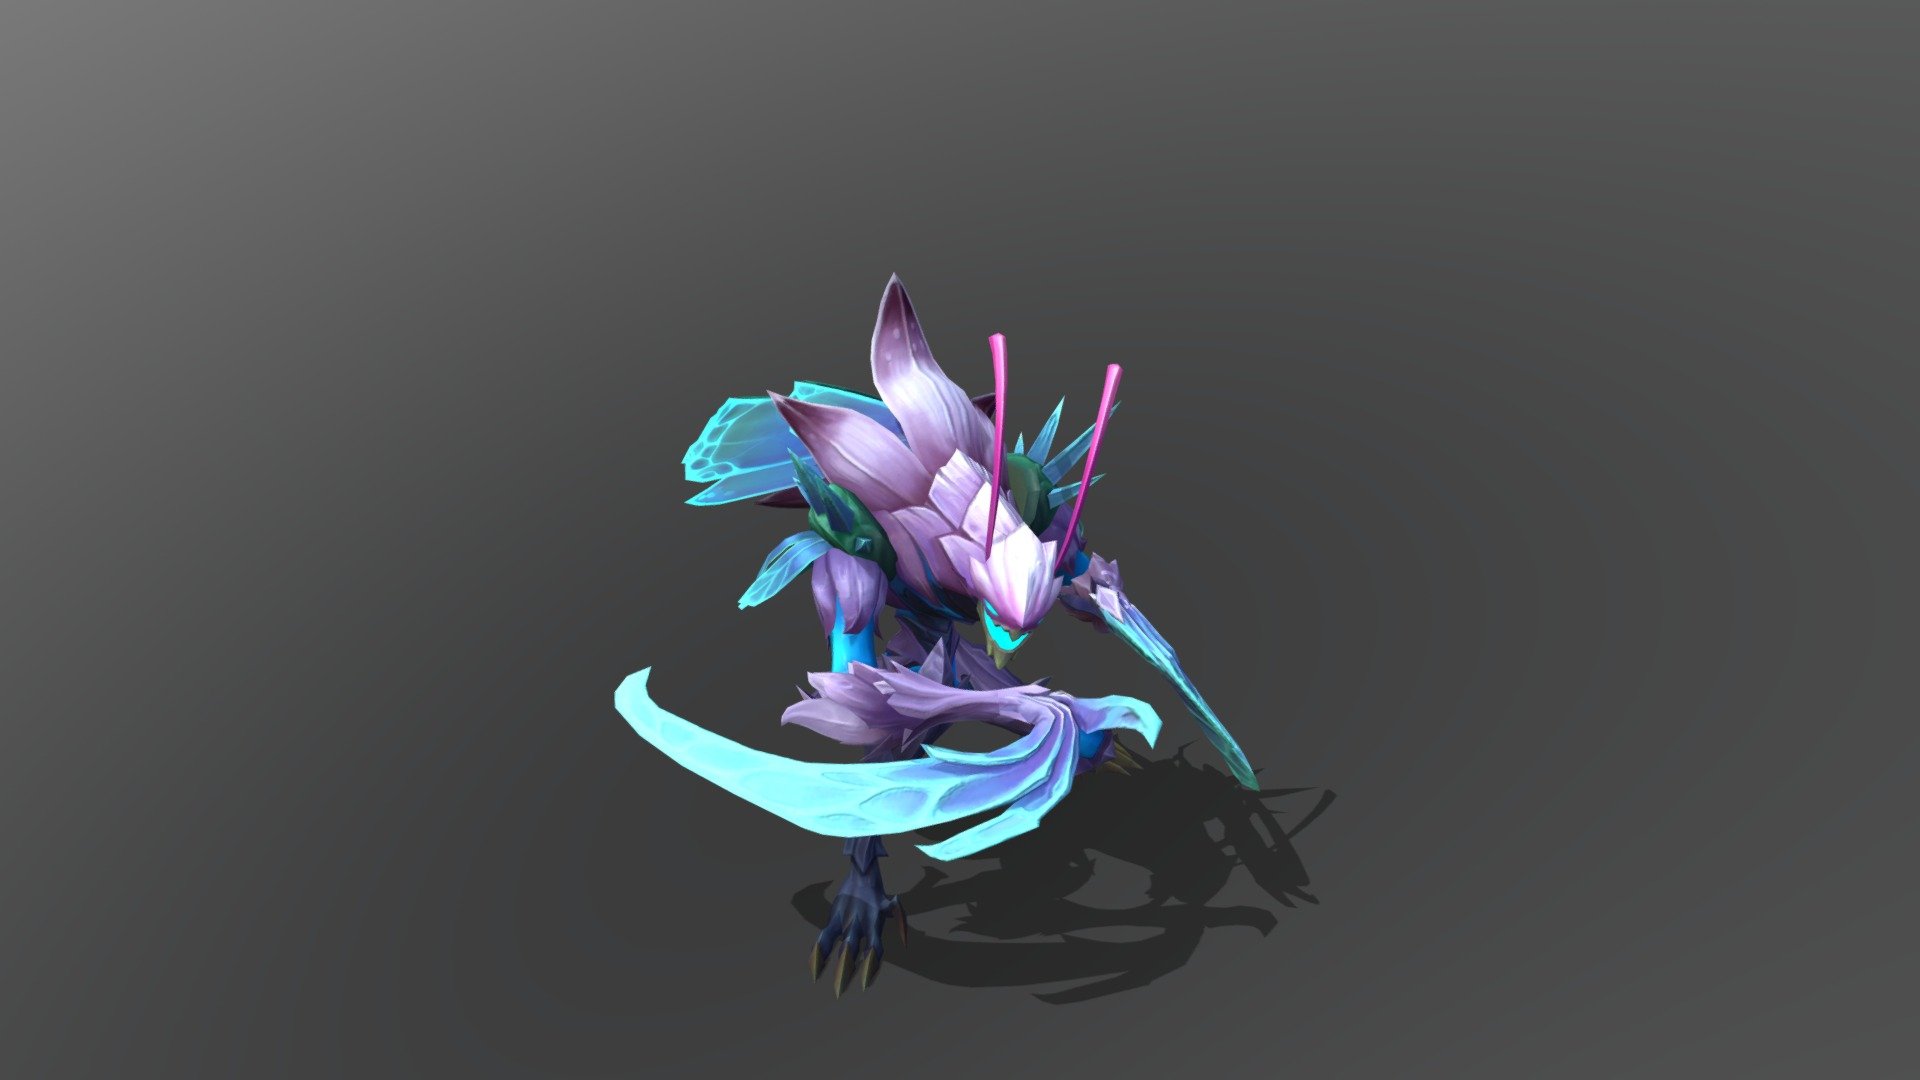 kha zix death blossom (outdated)